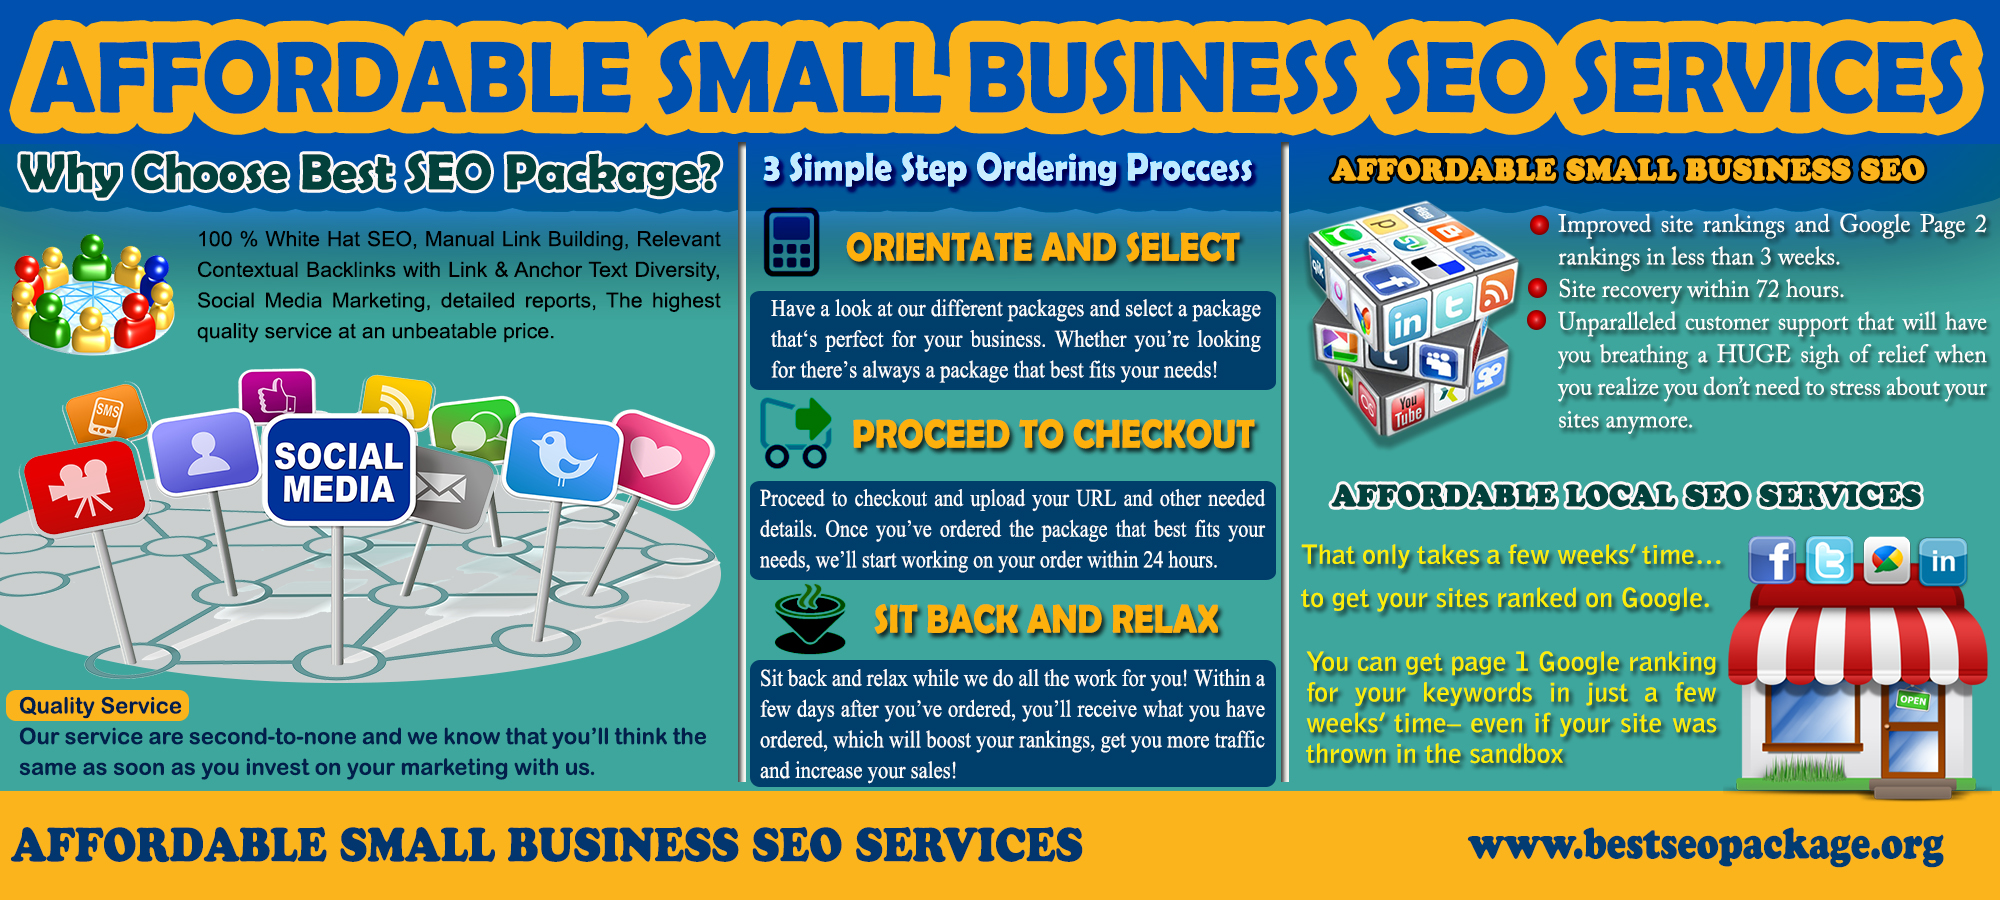 Affordable Small Business SEO Services - getseotechnique ...